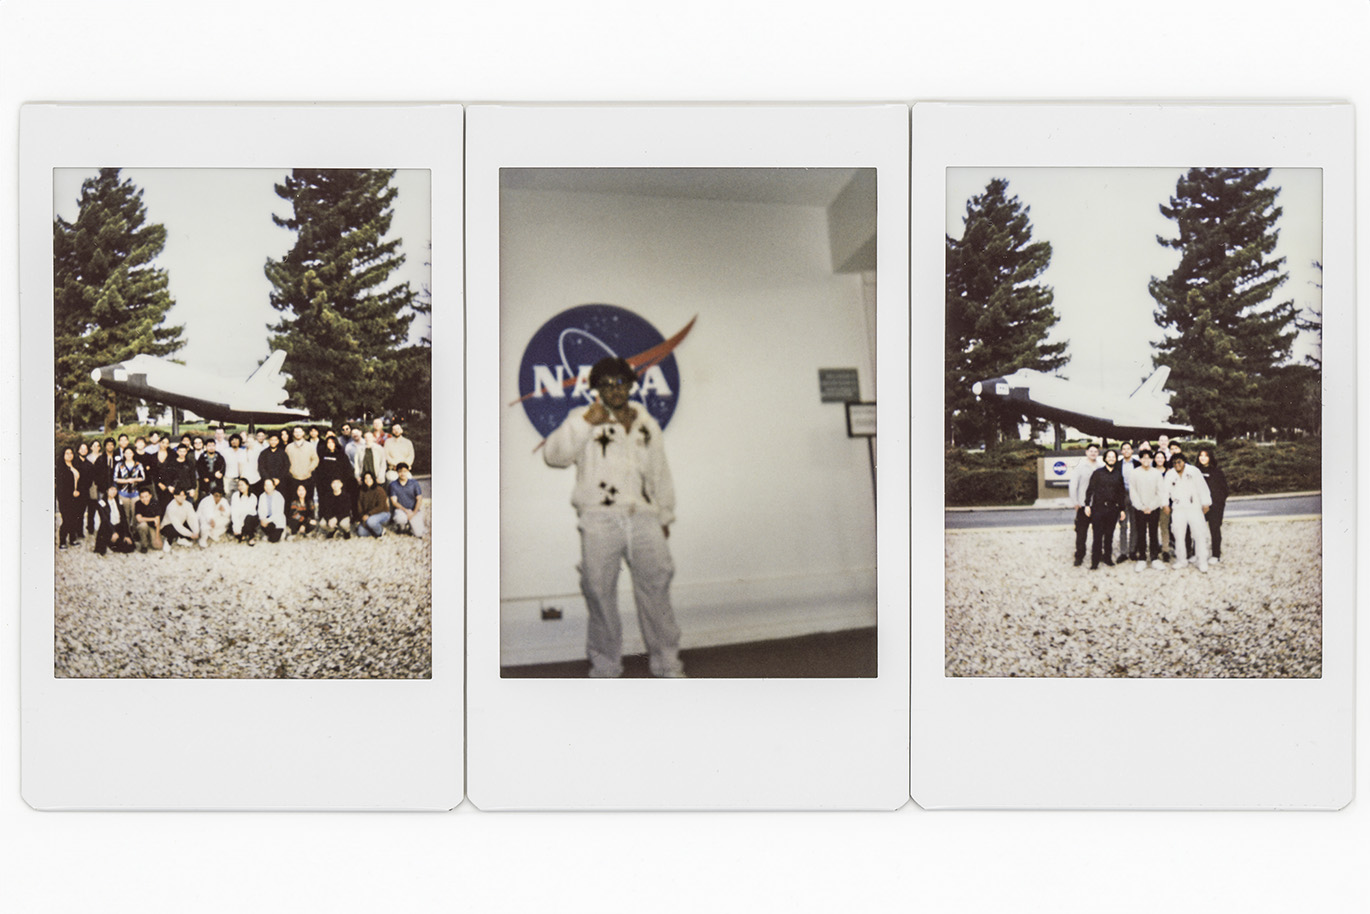 Set of three scanned polaroid photos showing two groups of college students out doors and a portrait of one male student posing by the NASA logo.